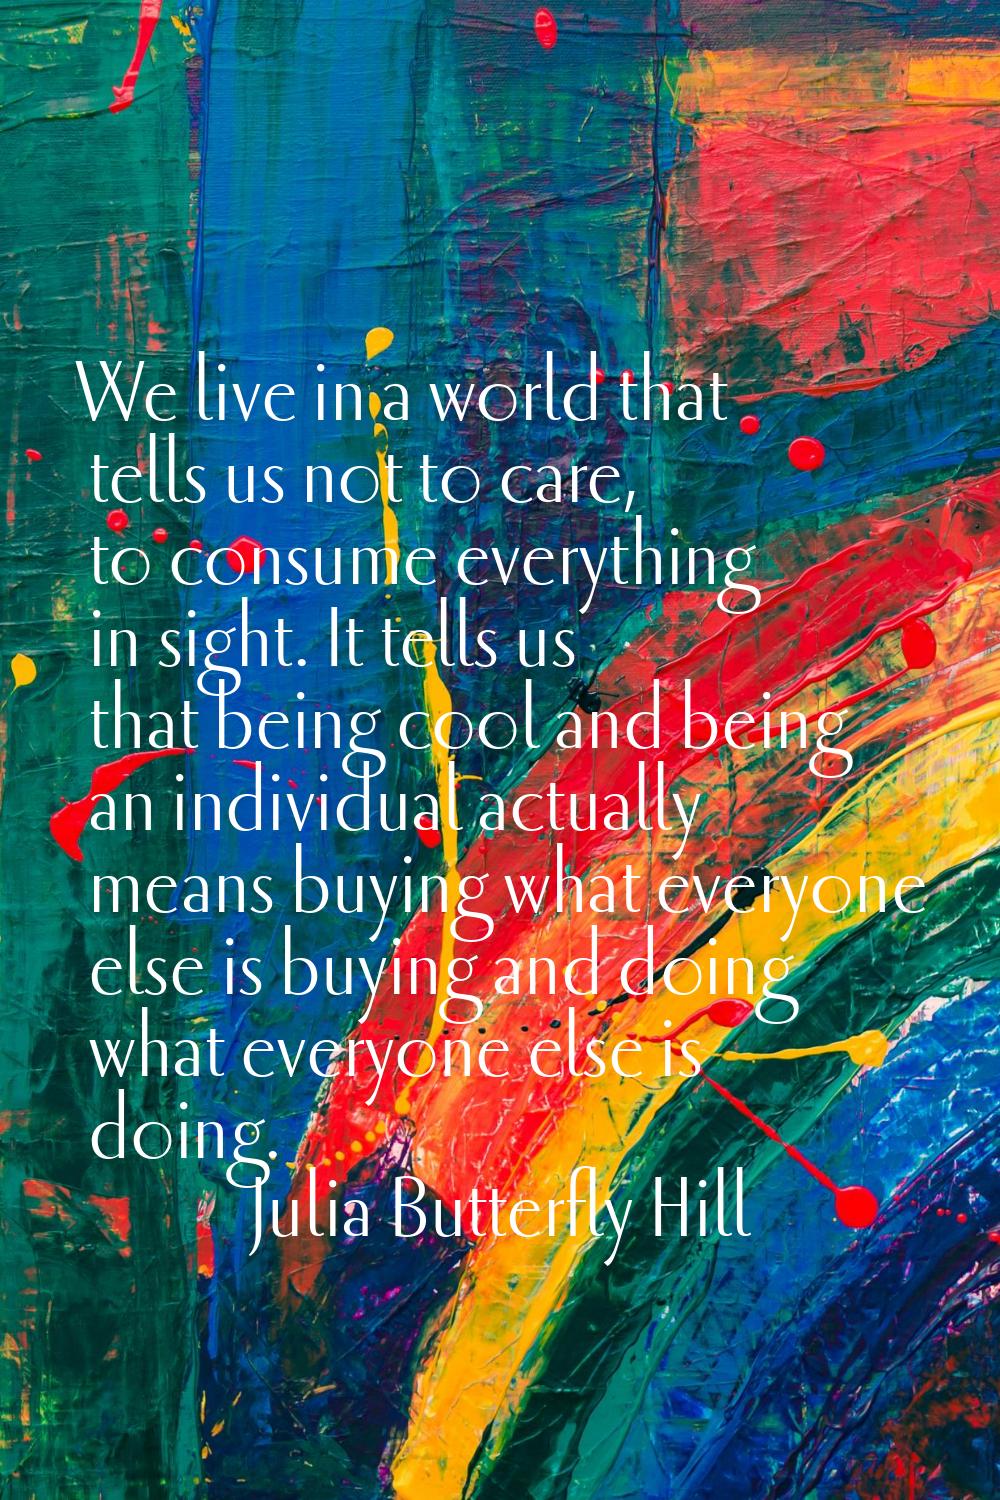 We live in a world that tells us not to care, to consume everything in sight. It tells us that bein